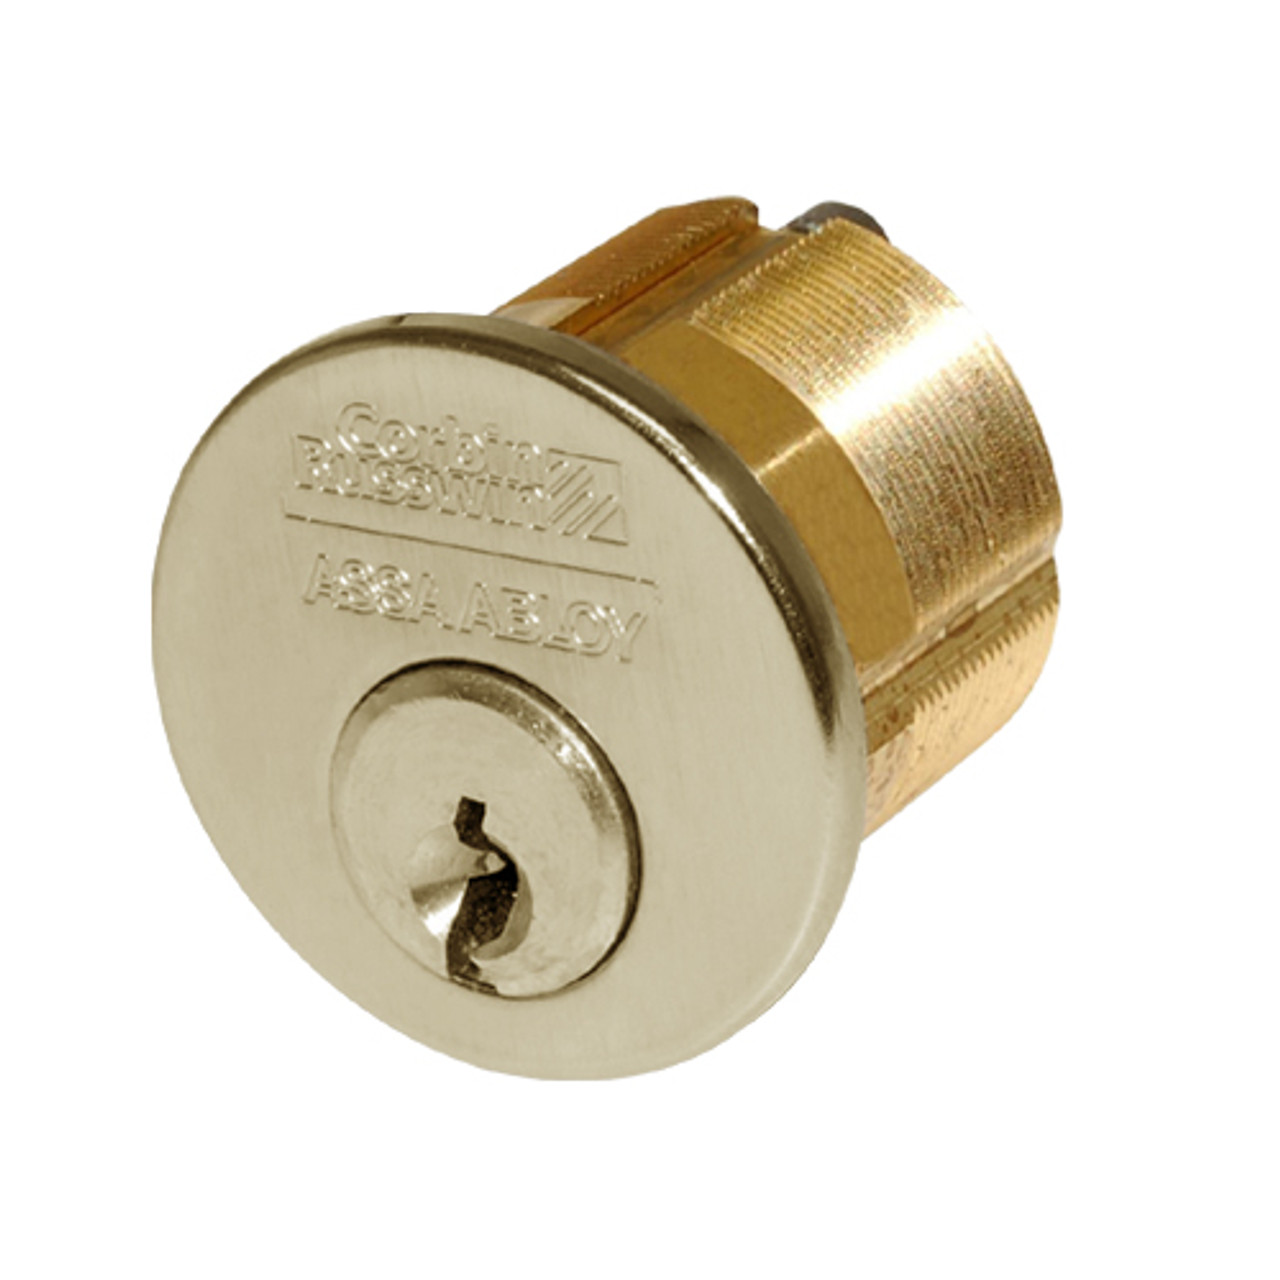 CR1000-138-A02-6-59A1-606 Corbin Conventional Mortise Cylinder for Mortise Lock and DL3000 Deadlocks with Straight Cam in Satin Brass Finish